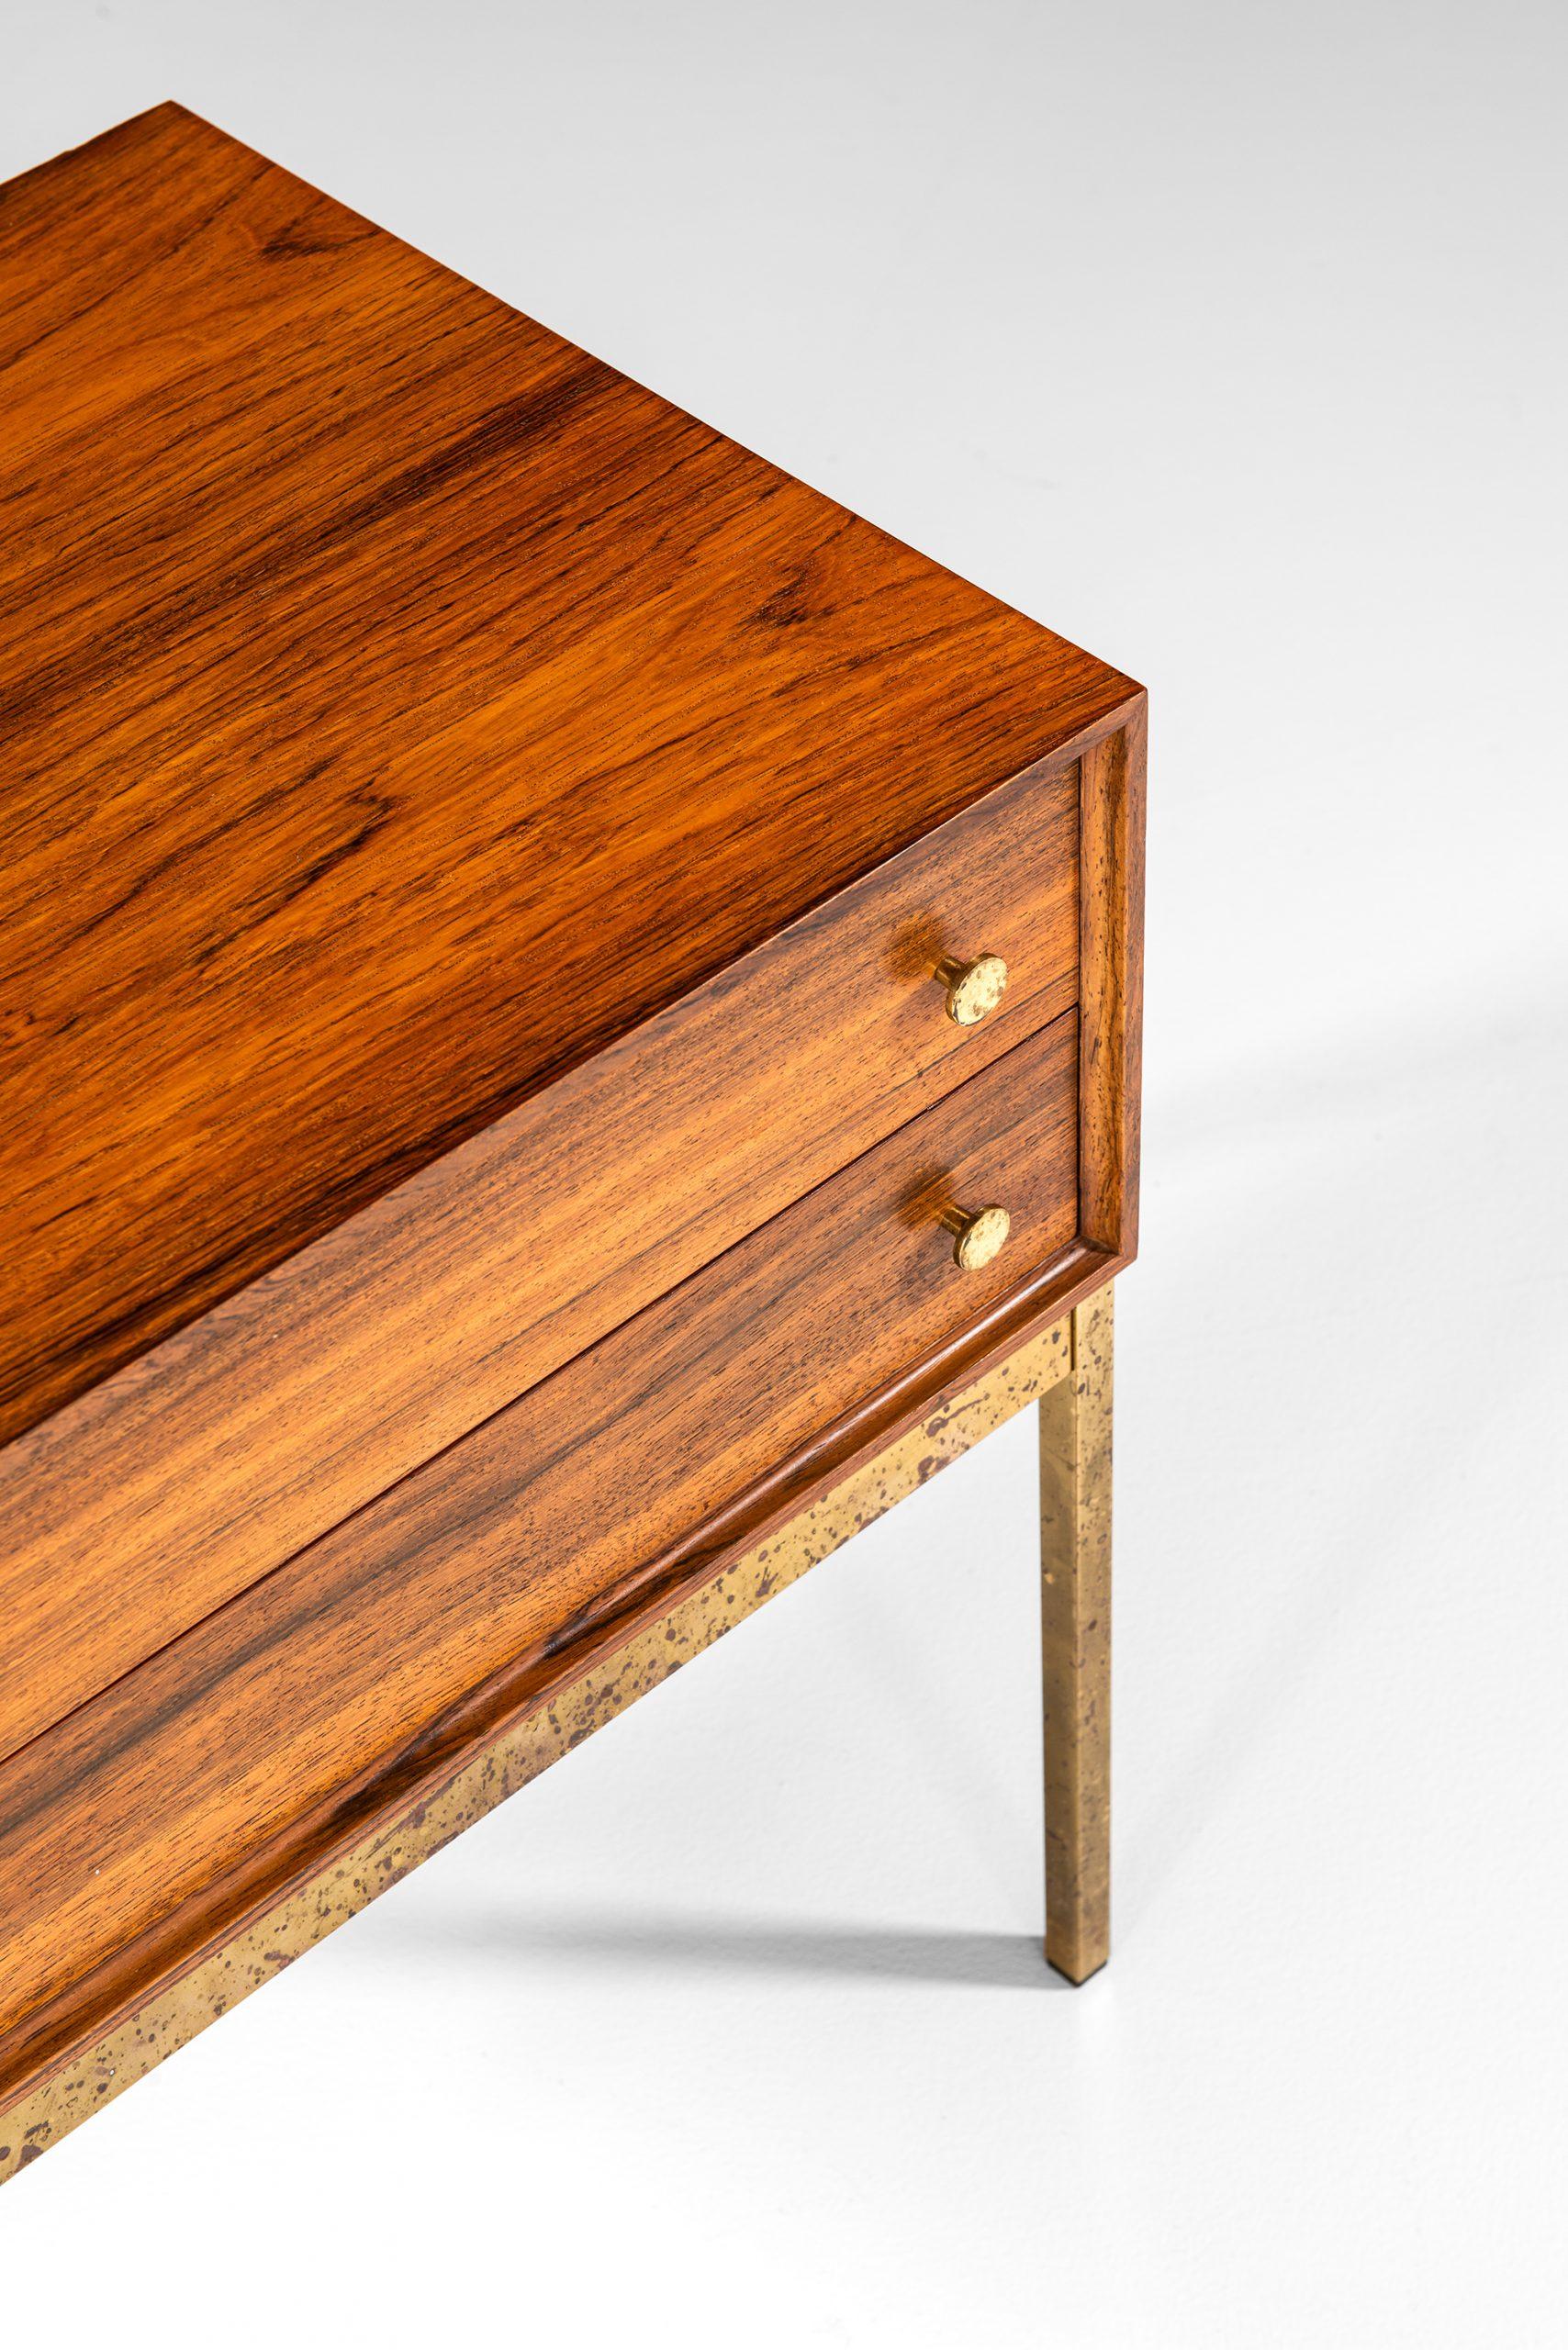 Mid-20th Century Side Table / Bureau Attributed to Poul Nørreklit Produced in Sweden For Sale